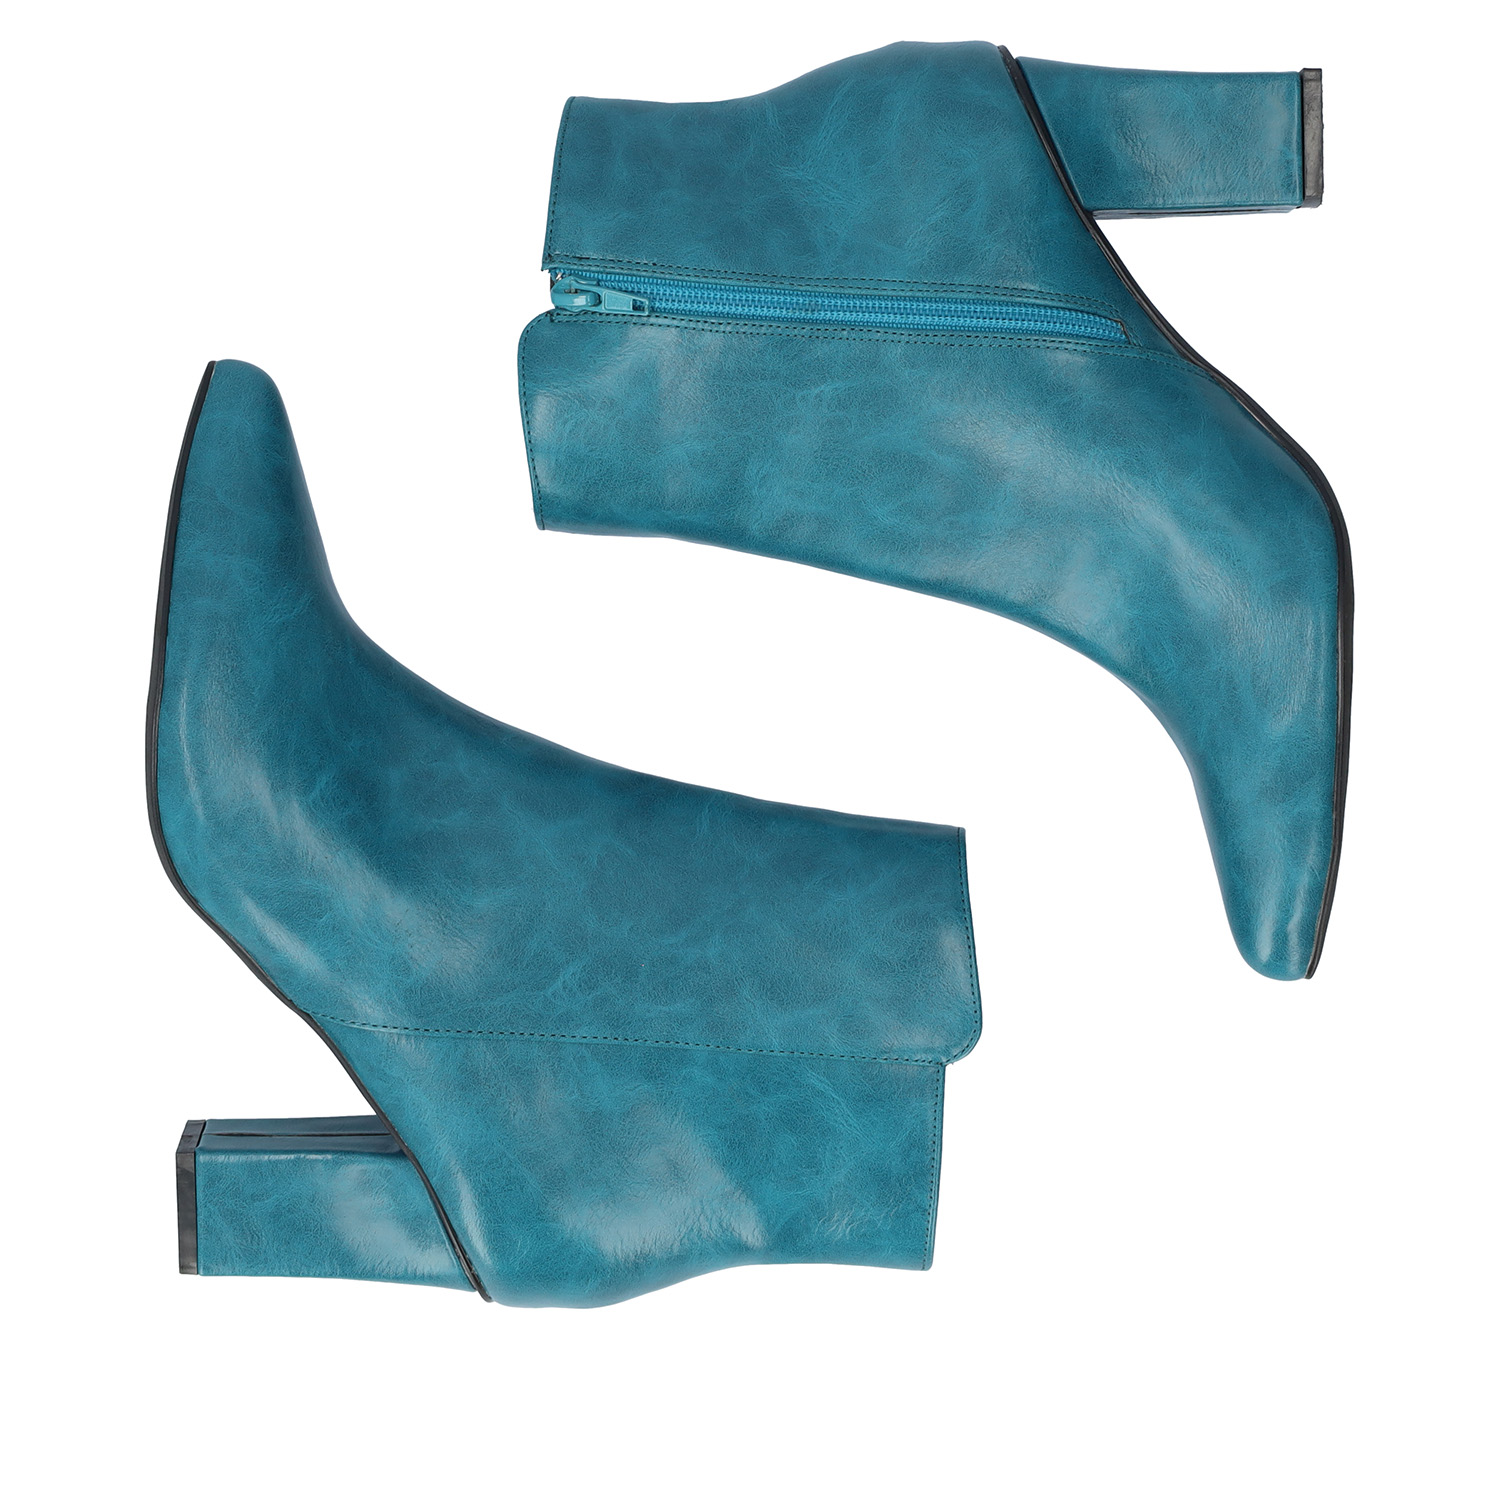 Heeled booties in blue faux leather. 